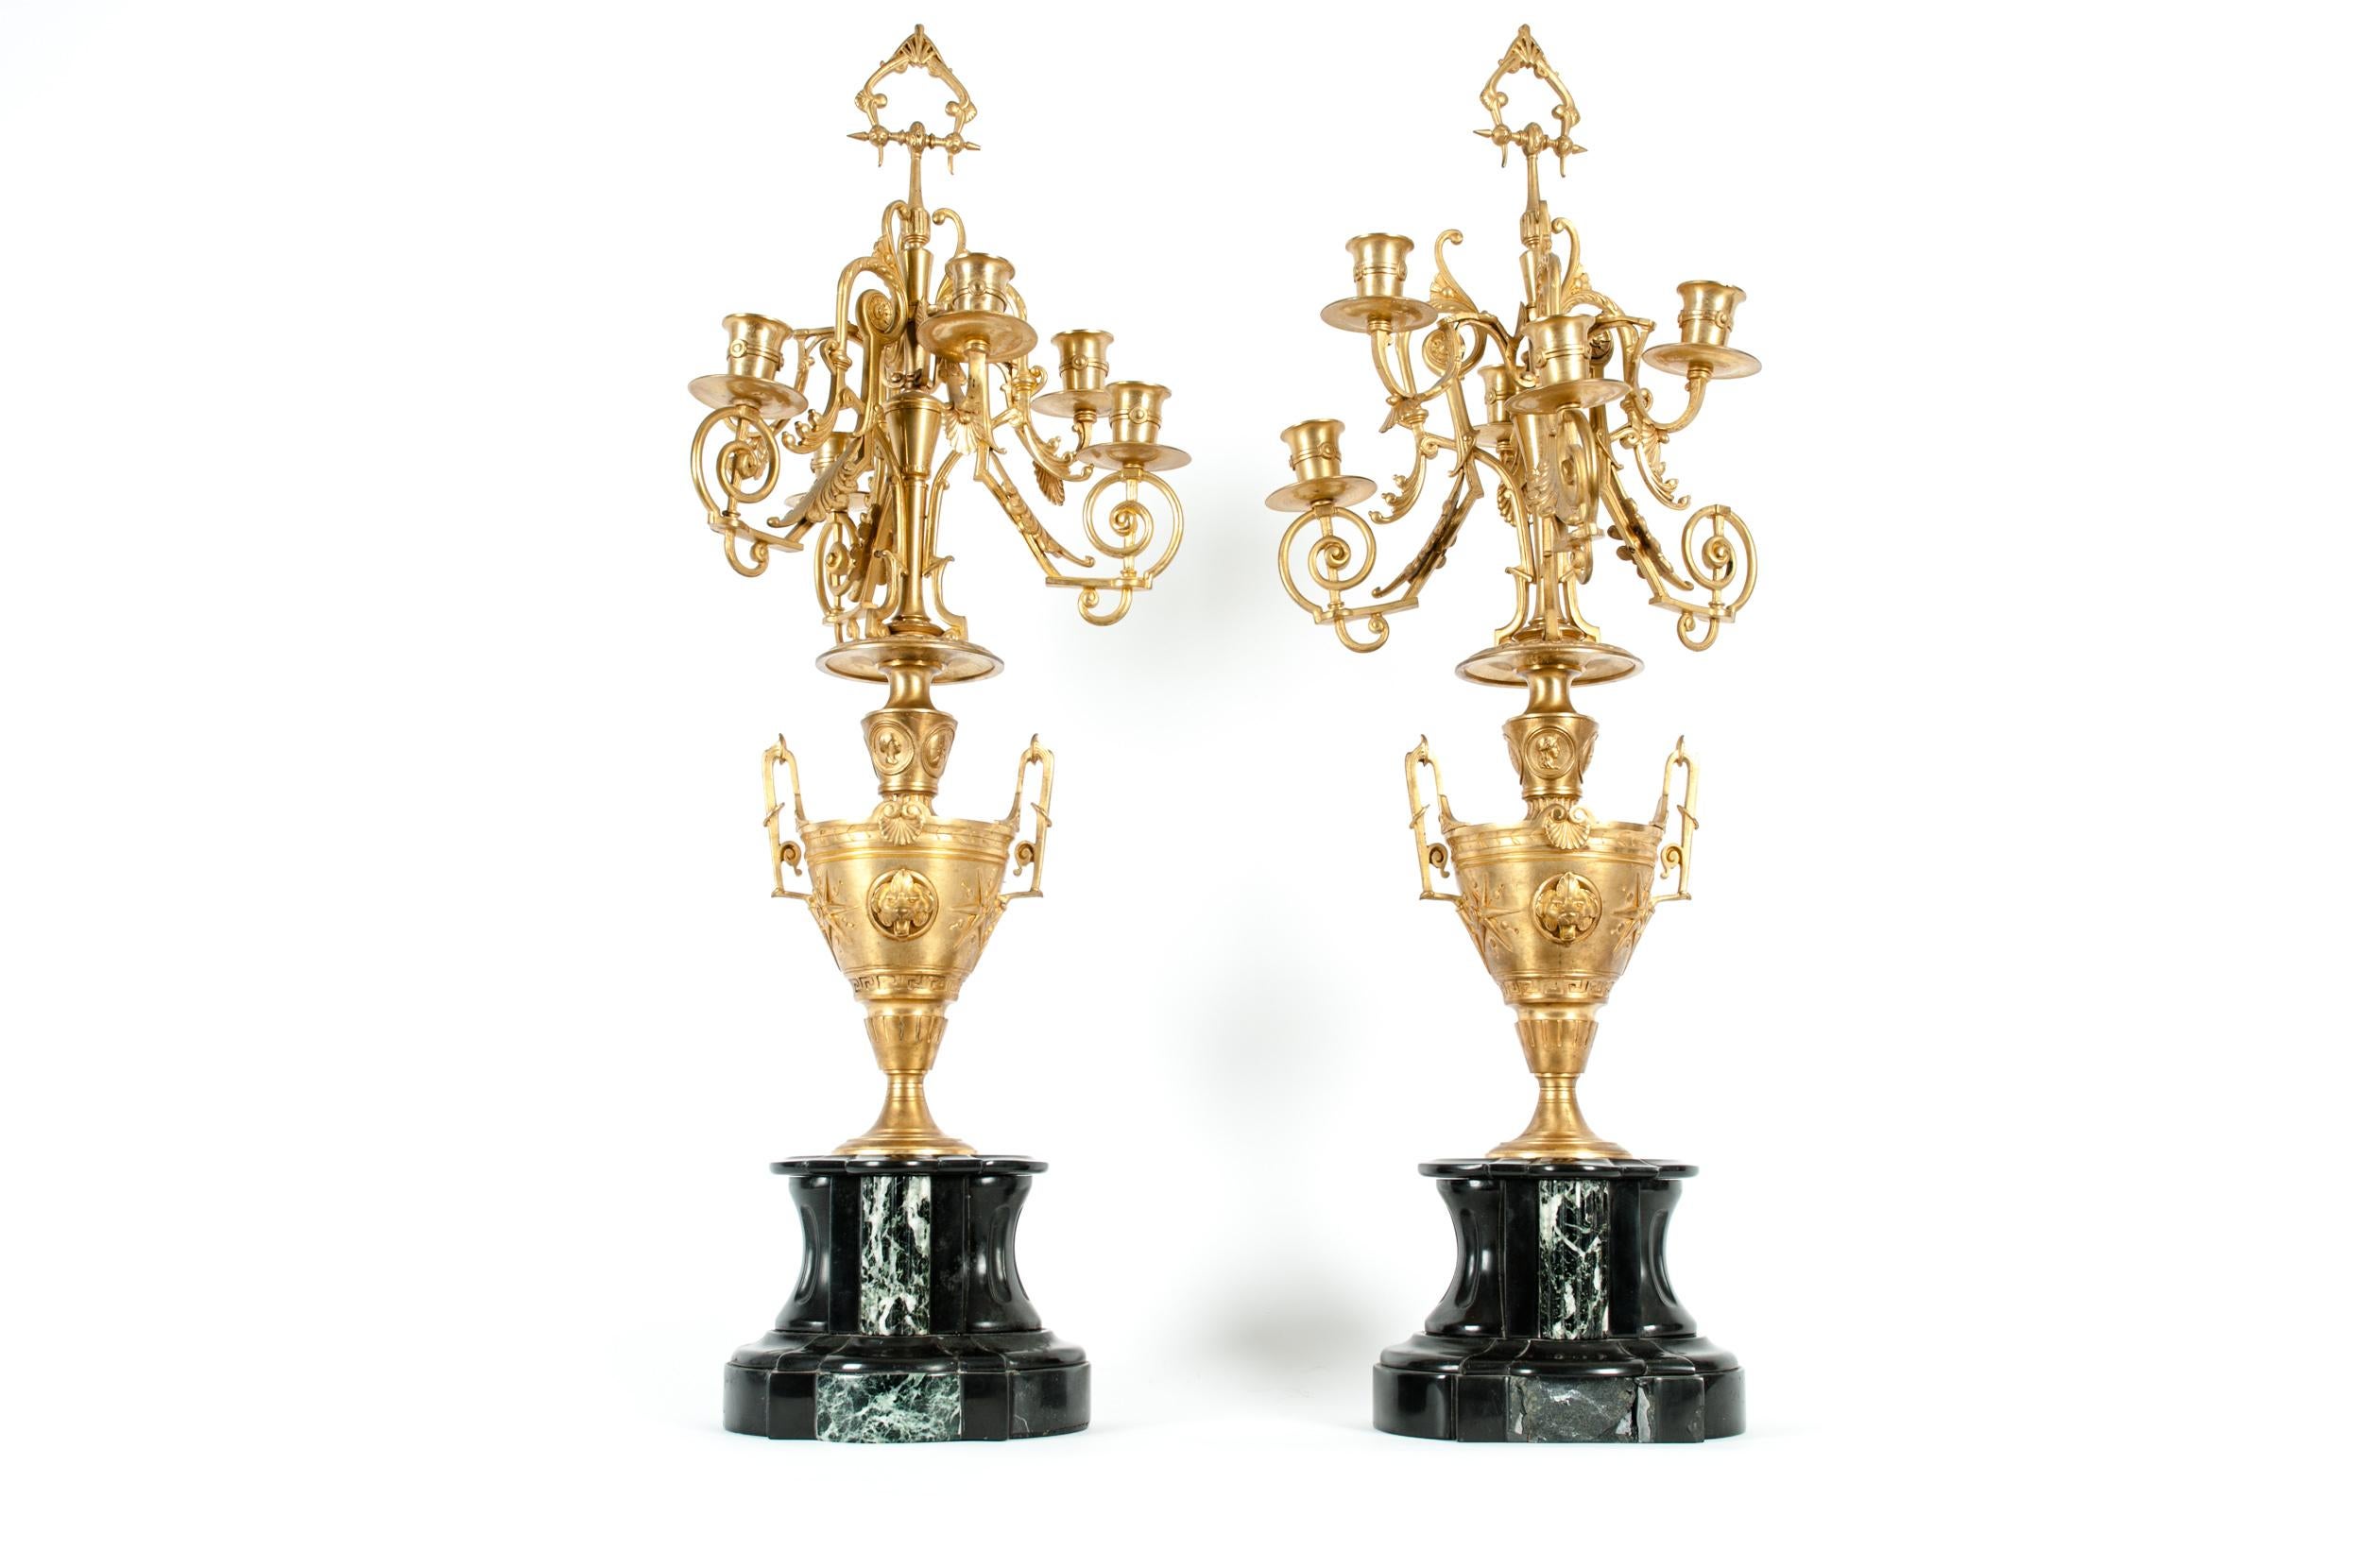 Mid-19th century gilt bronze five arms candelabra with black slate holding base. Each candelabra is in great antique condition with wear appropriate to age / use. Each candelabra measure about 29 inches high x 11 inches diameter.